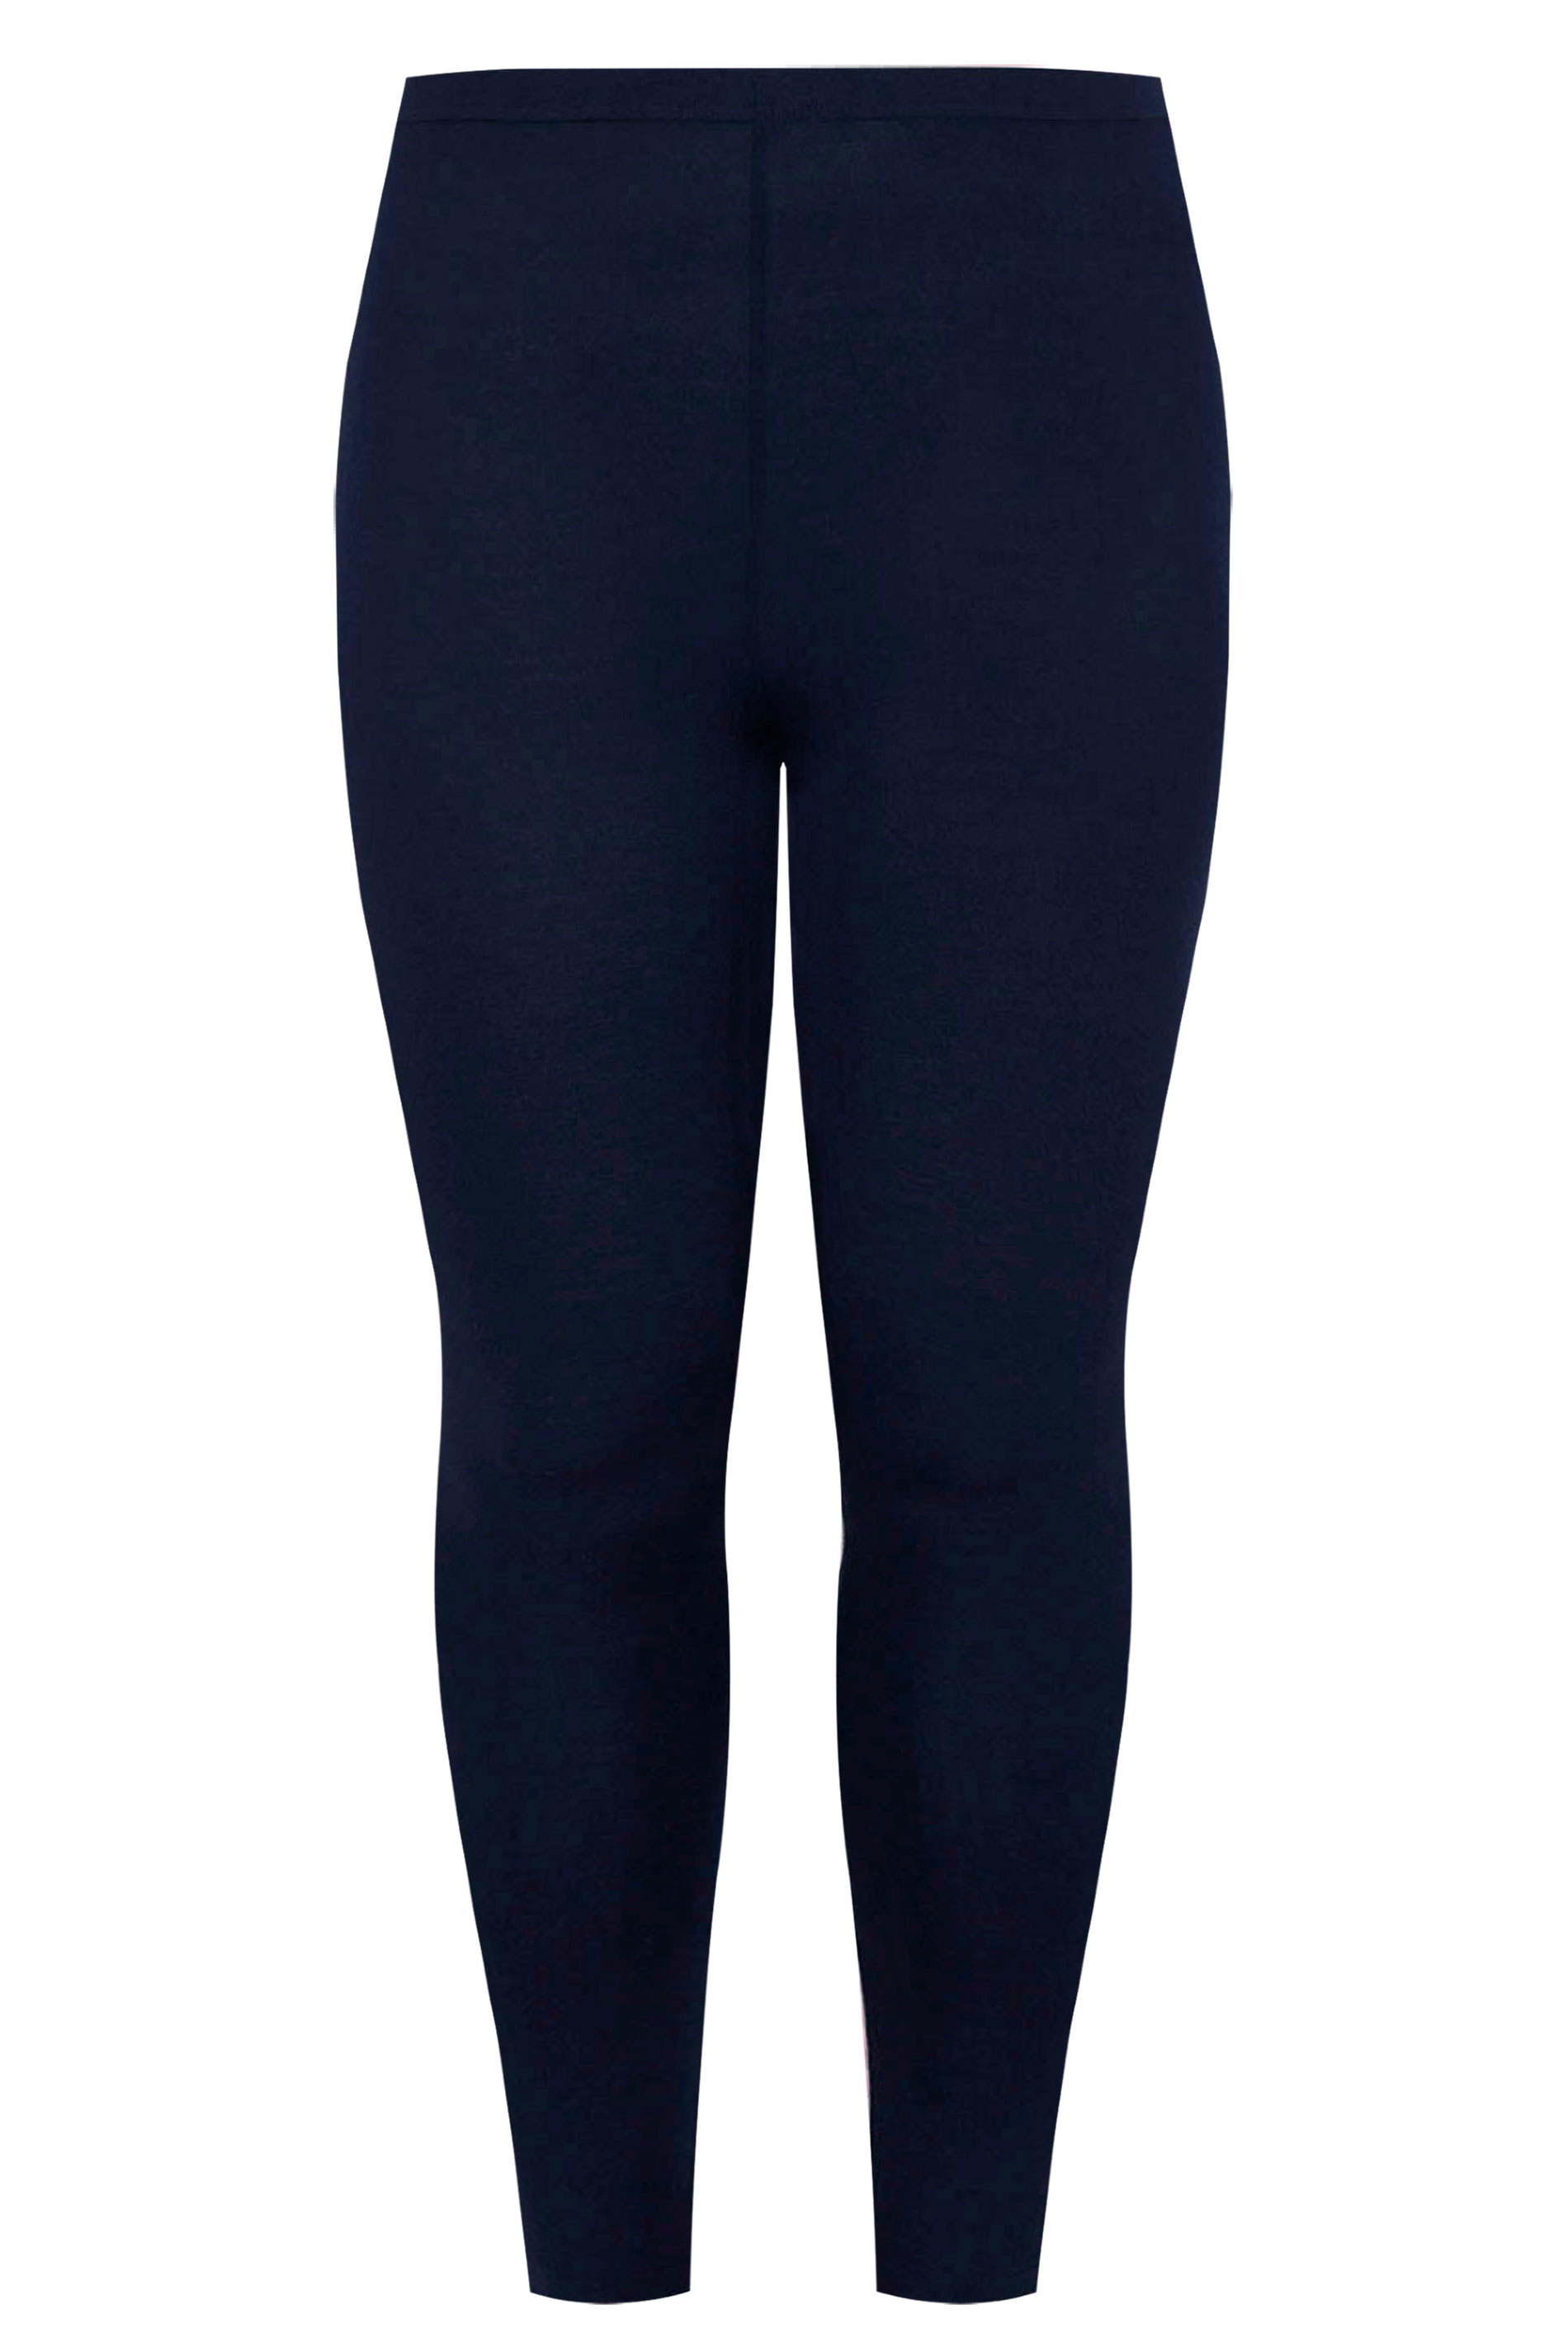 Plus Size Women's Stretch Cotton Legging by Woman Within in Heather Navy ( Size M) - Yahoo Shopping